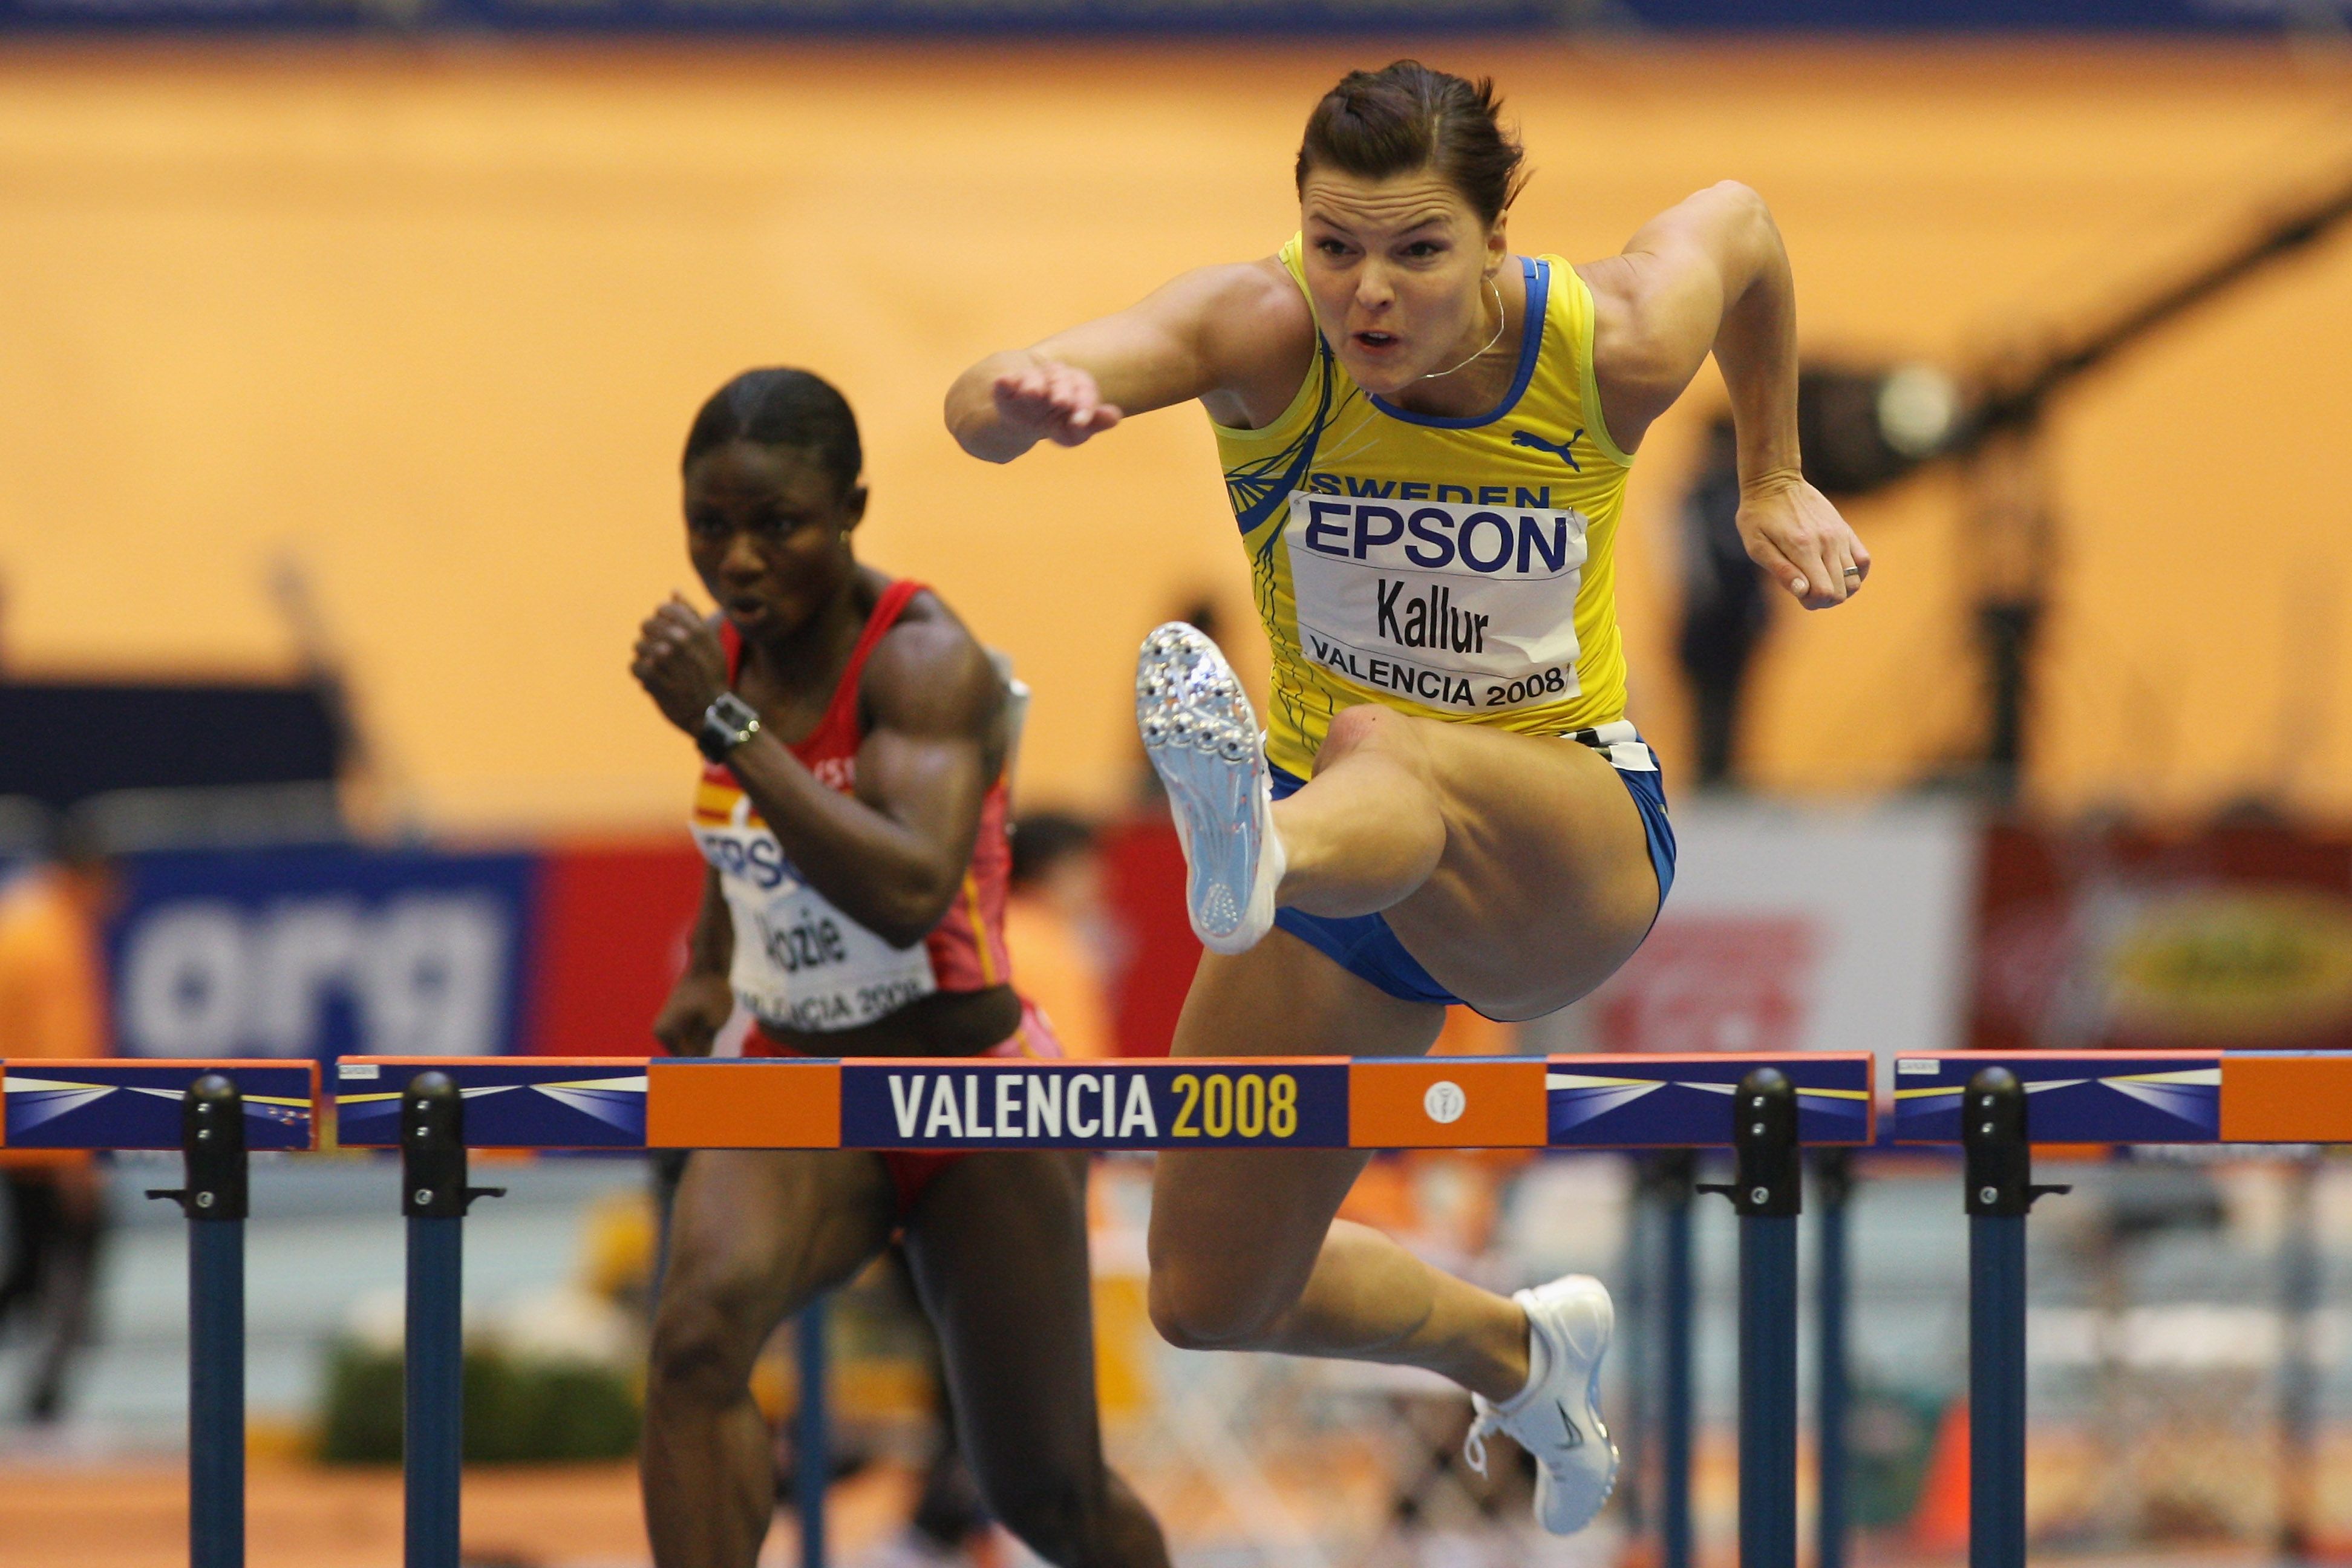 Susanna Kallur competes at the World Indoor Championships in Valencia